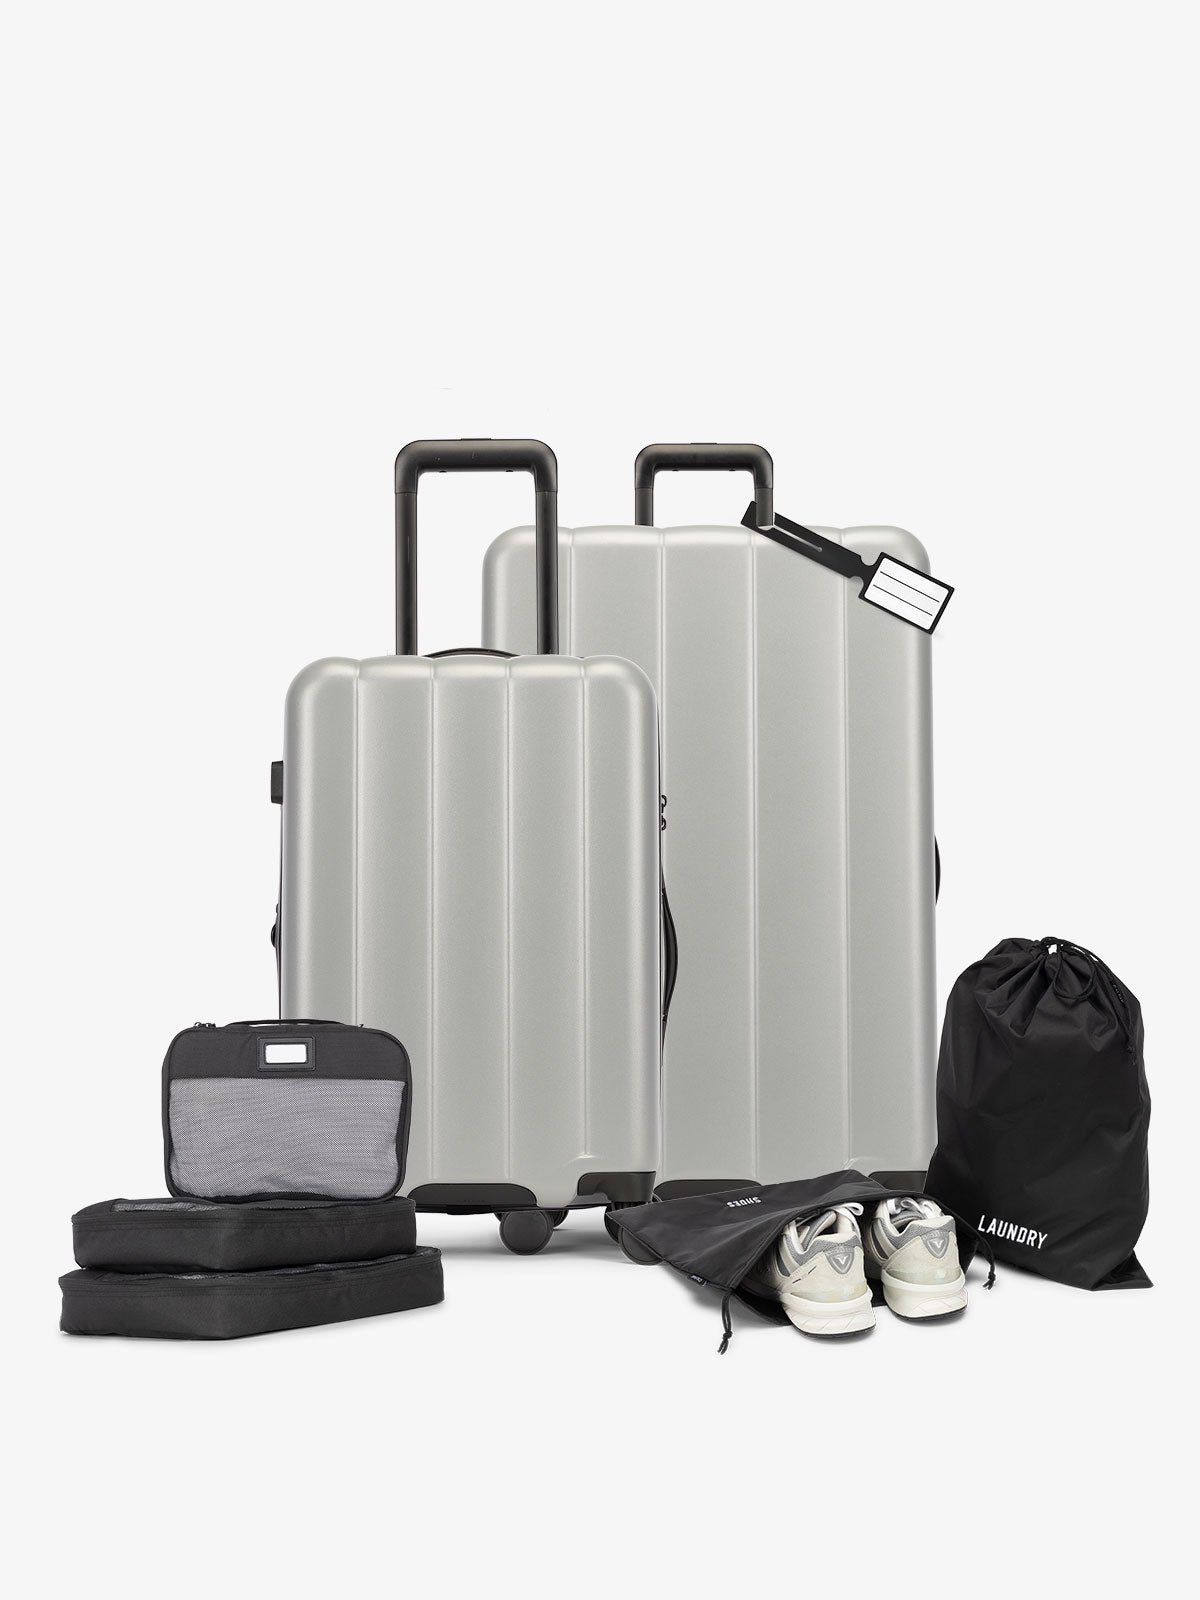 CALPAK Starter Luggage Set with Carry-On, Large Luggage, Packing Cubes, Pouches and Luggage tag in gray smoke